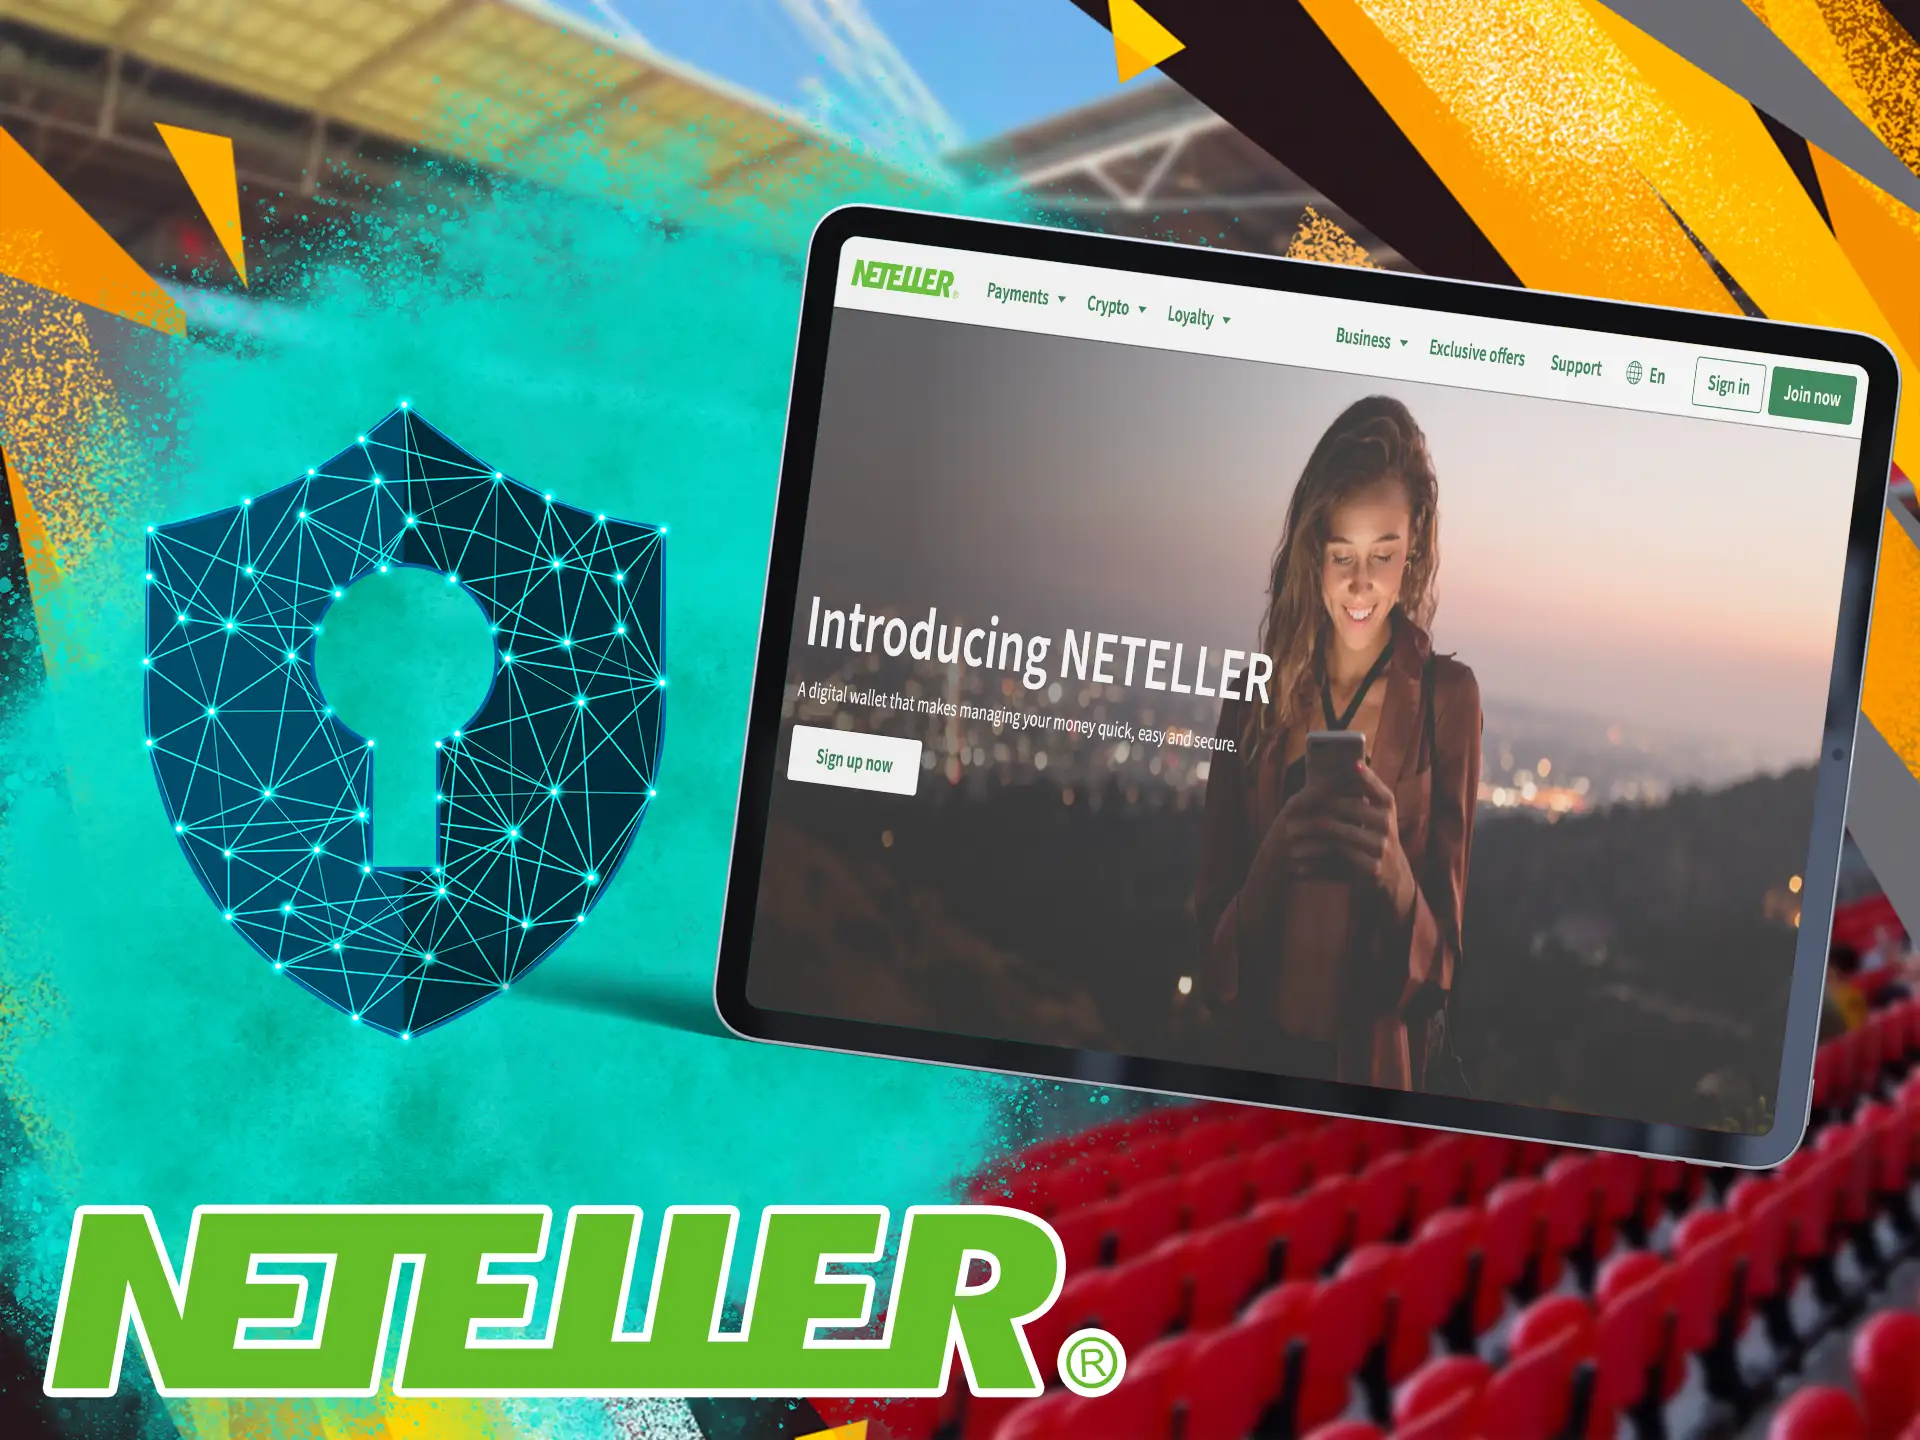 Neteller site is protected by ssl protocol, which minimizes information leaks that corresponds to security standards.